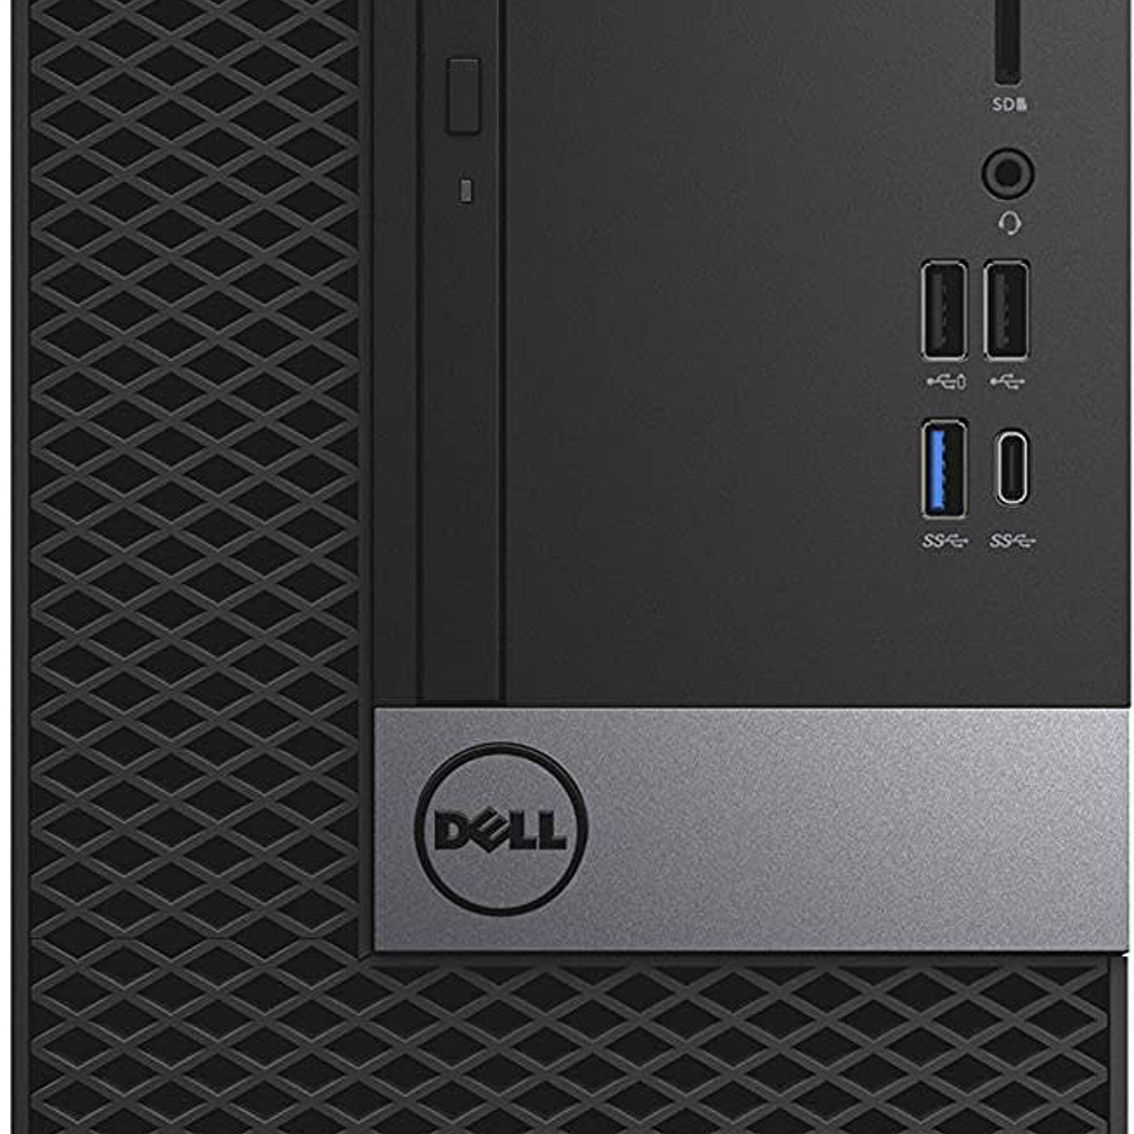 Dell 7050-T Core i7-6700 3.4GHz 16GB 512GB SSD PC (Refurbished) - Image 2 of 3